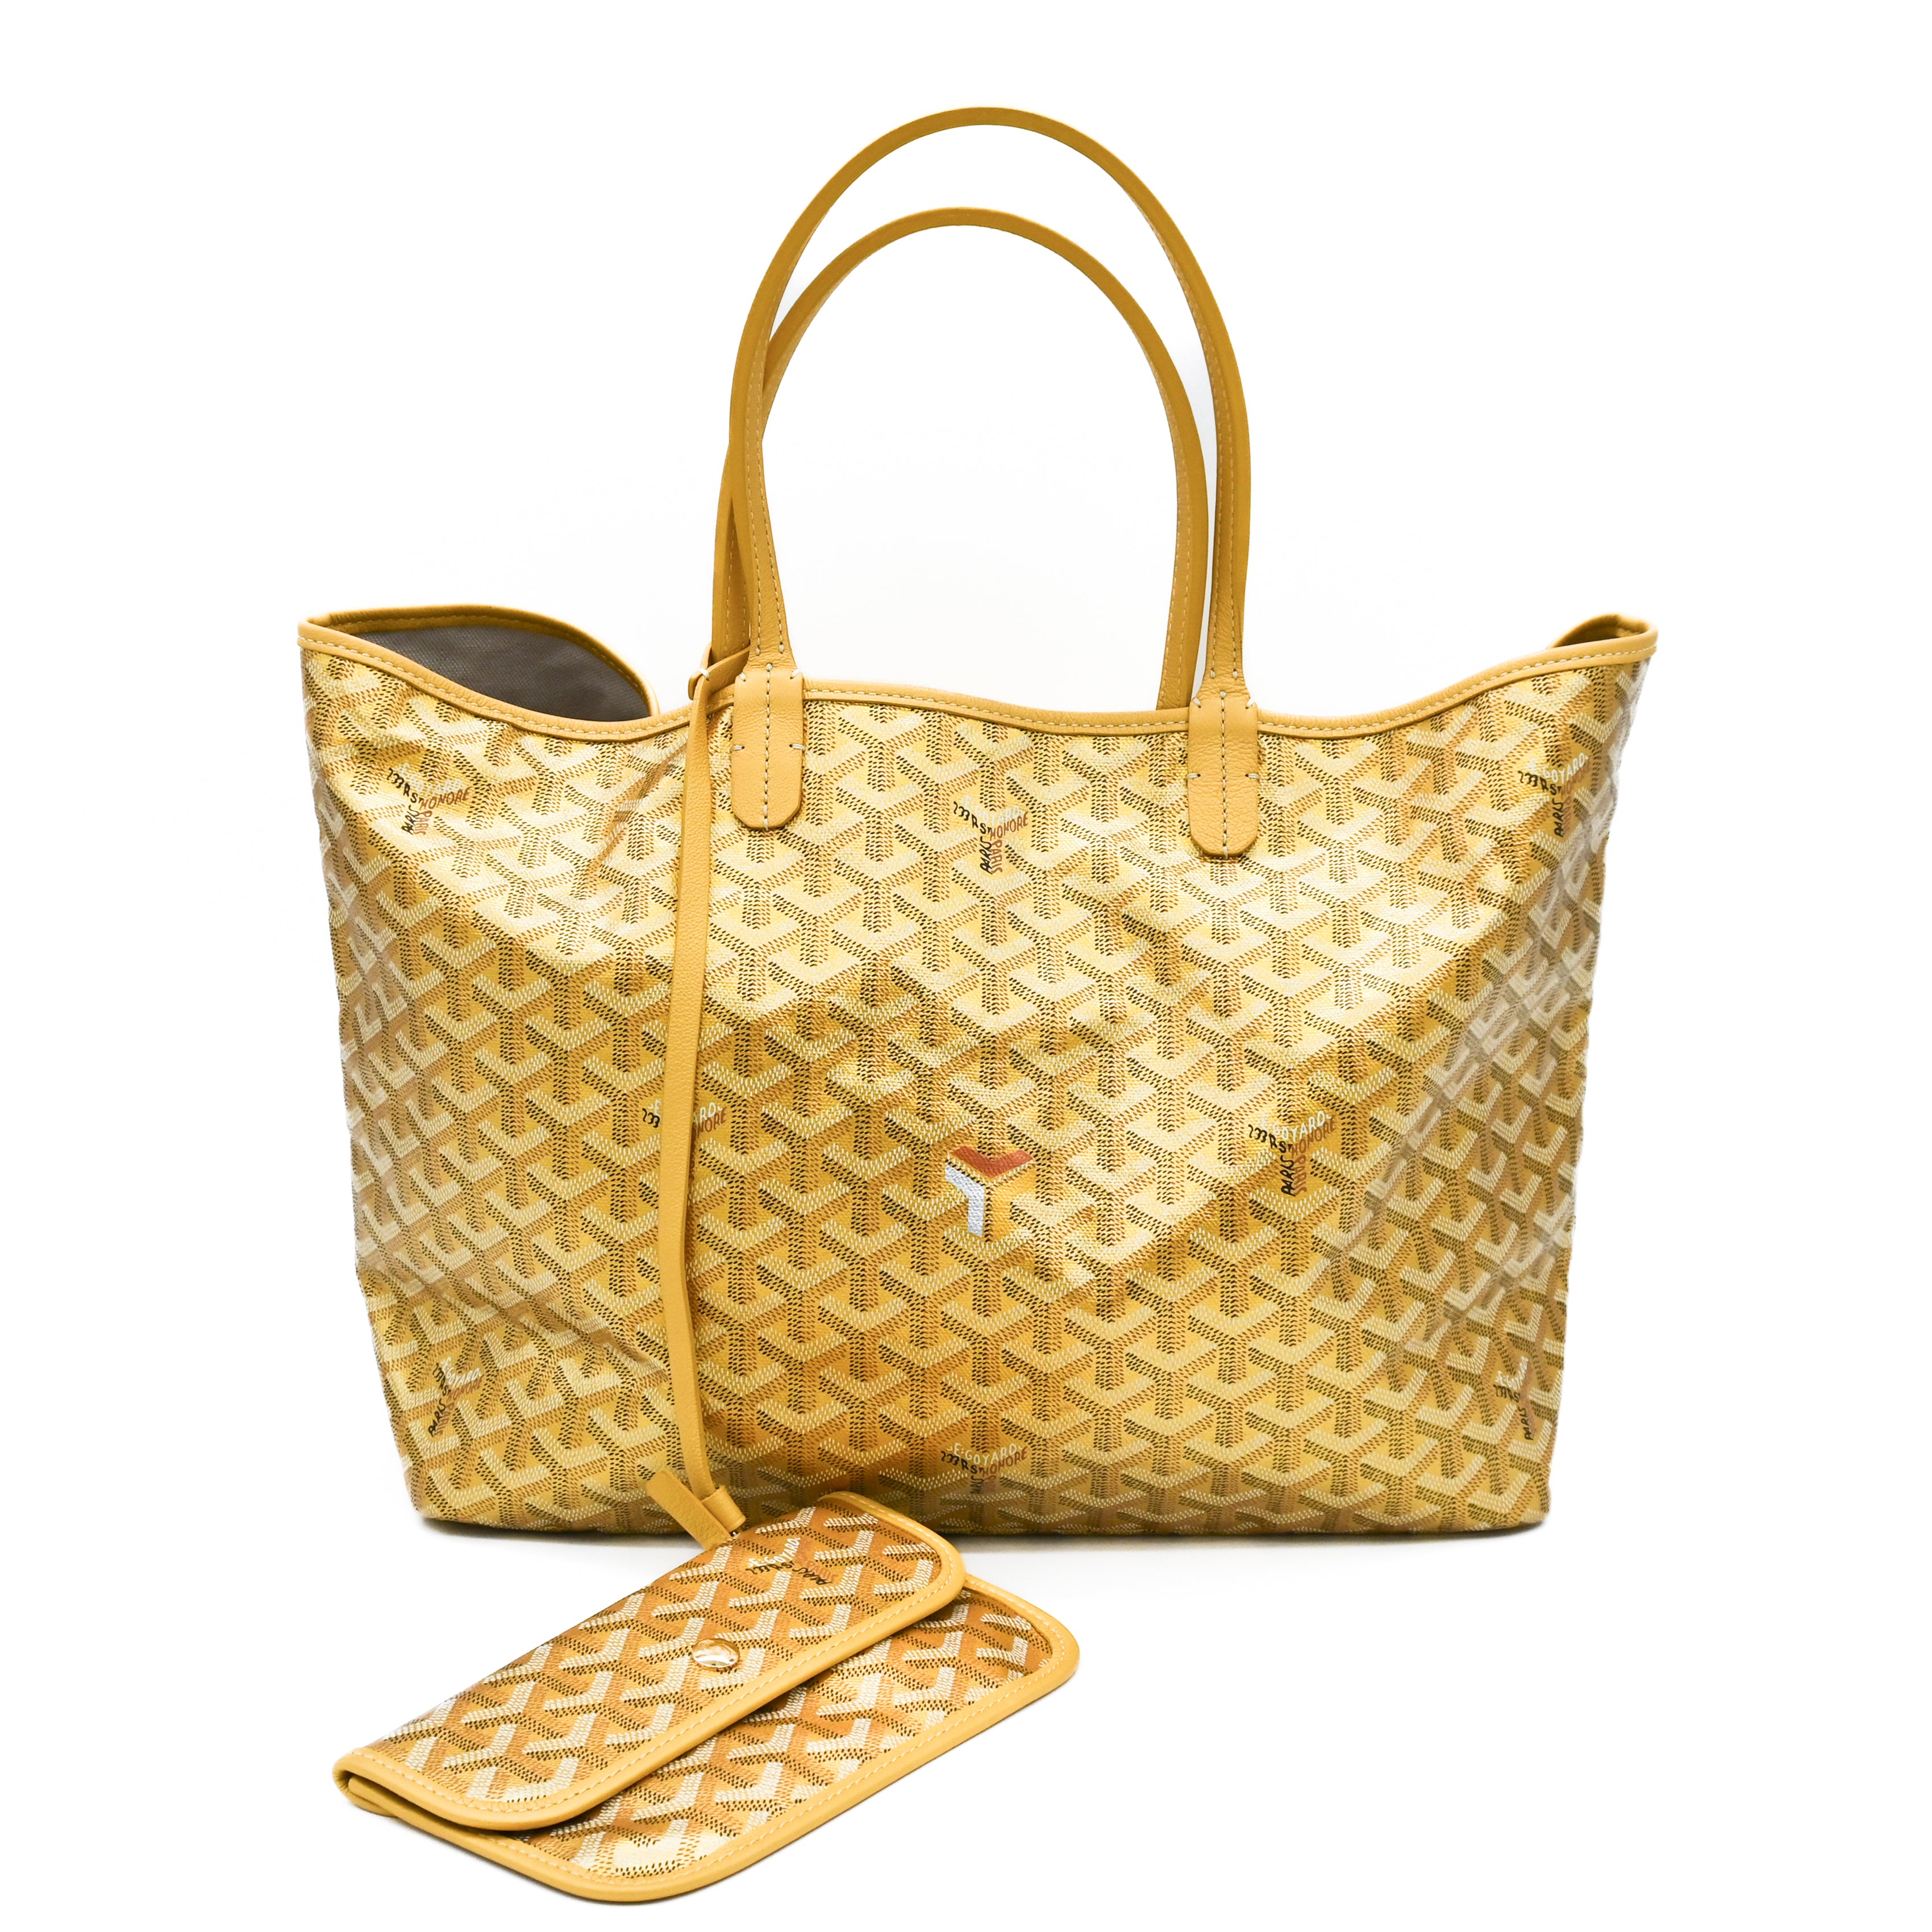 Shop Goyard Black/Brown Goyardine Coated Canvas And Leather Saint Louis GM  Tote For Women - Save 10% Off Your First Purchase. Free - Goyard Sales Shop  